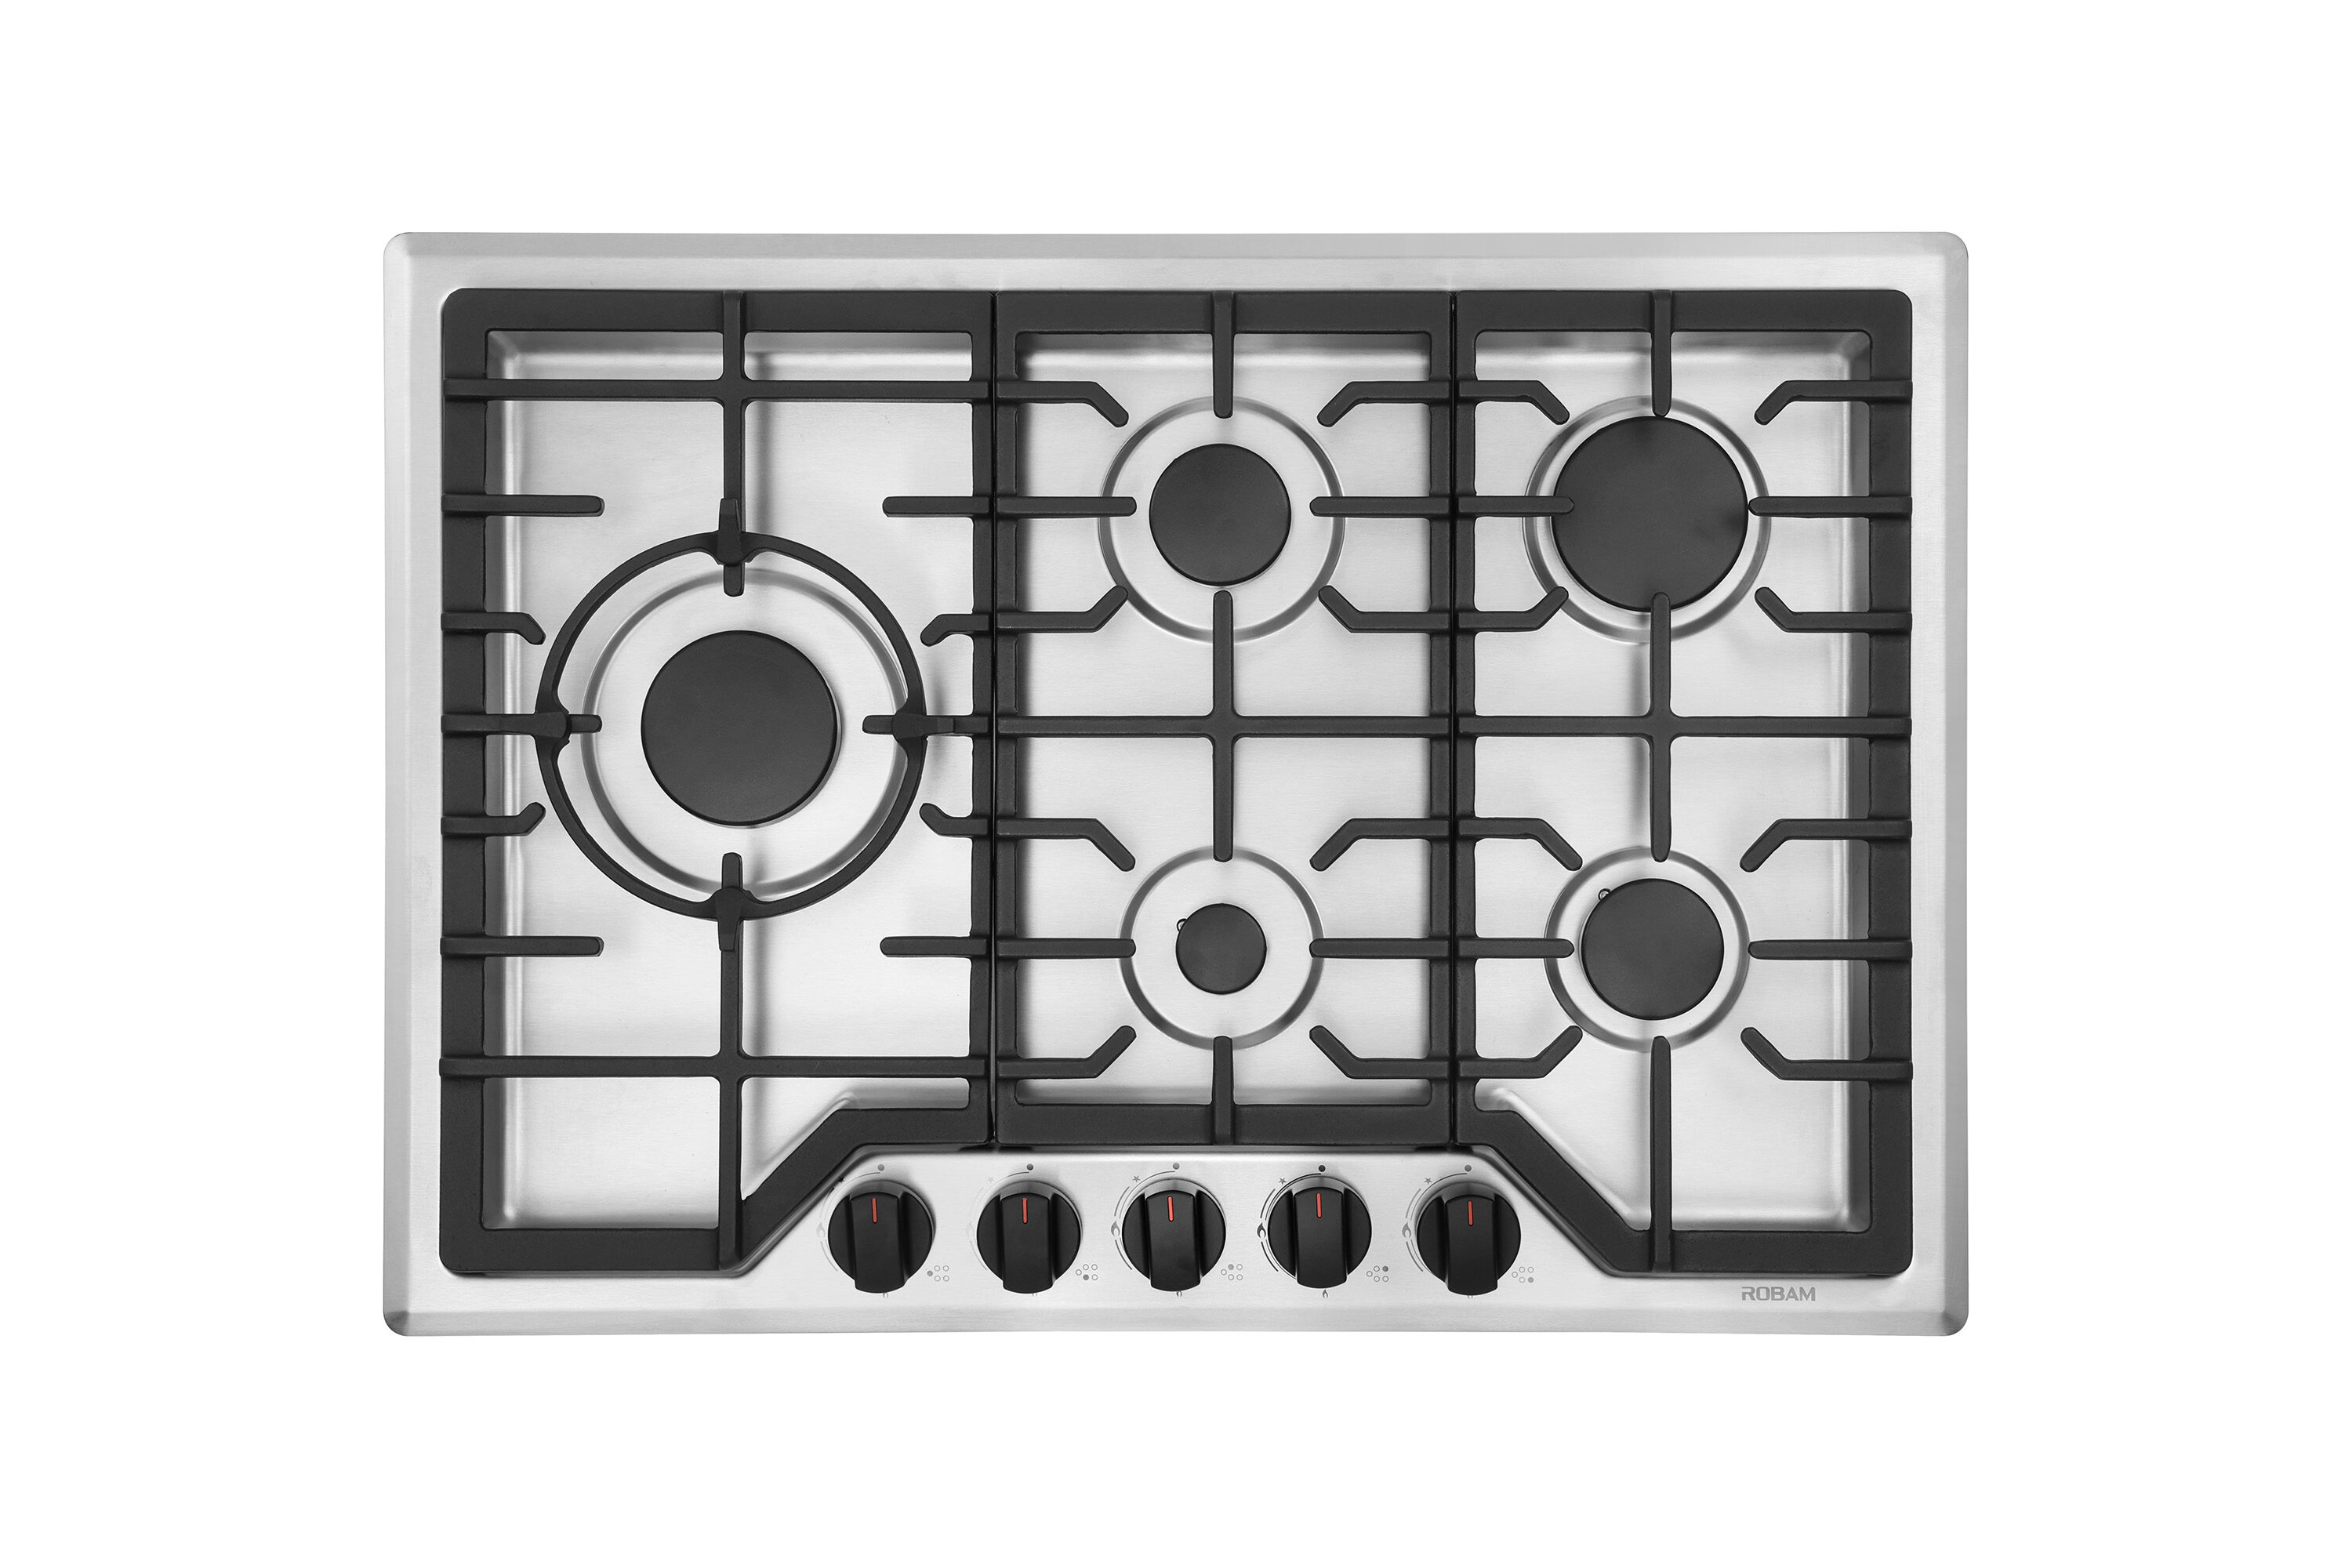 30-in 5 Burners Stainless Steel Gas Cooktop | -7G7H50 - ROBAM ROBAM-7G7H50